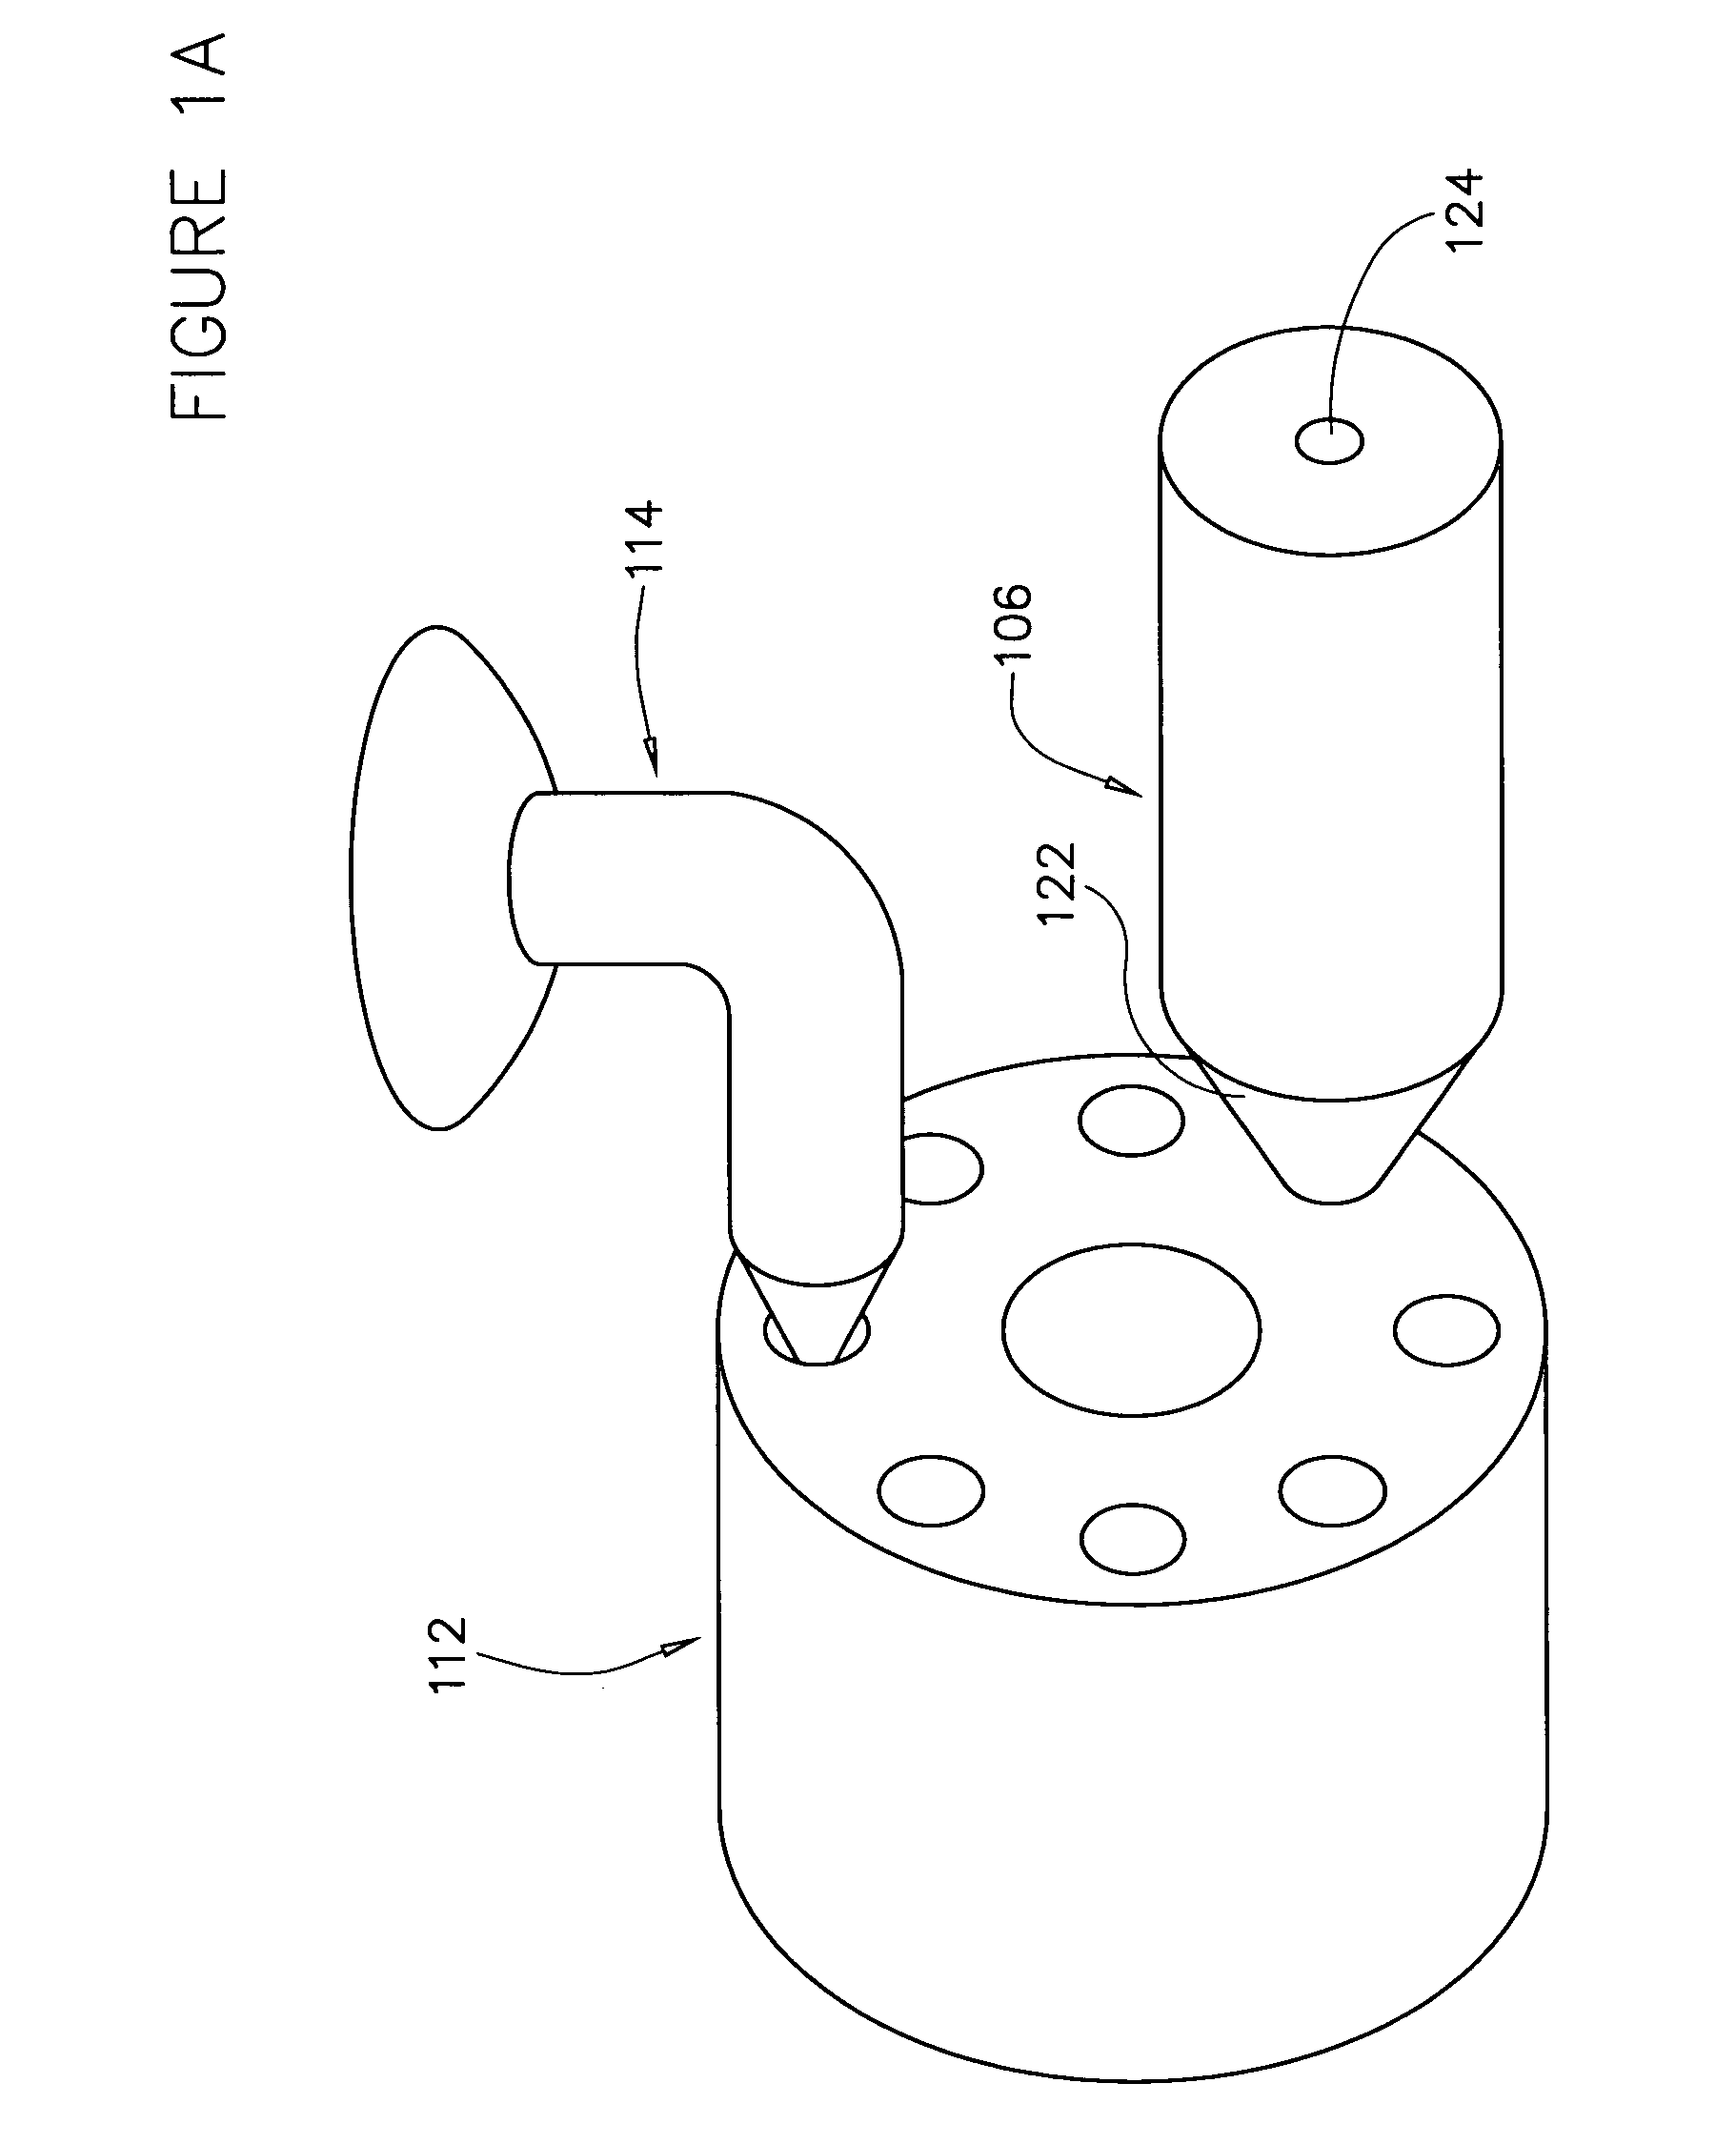 System and method for rapid chromatography with fluid temperature and mobile phase composition control